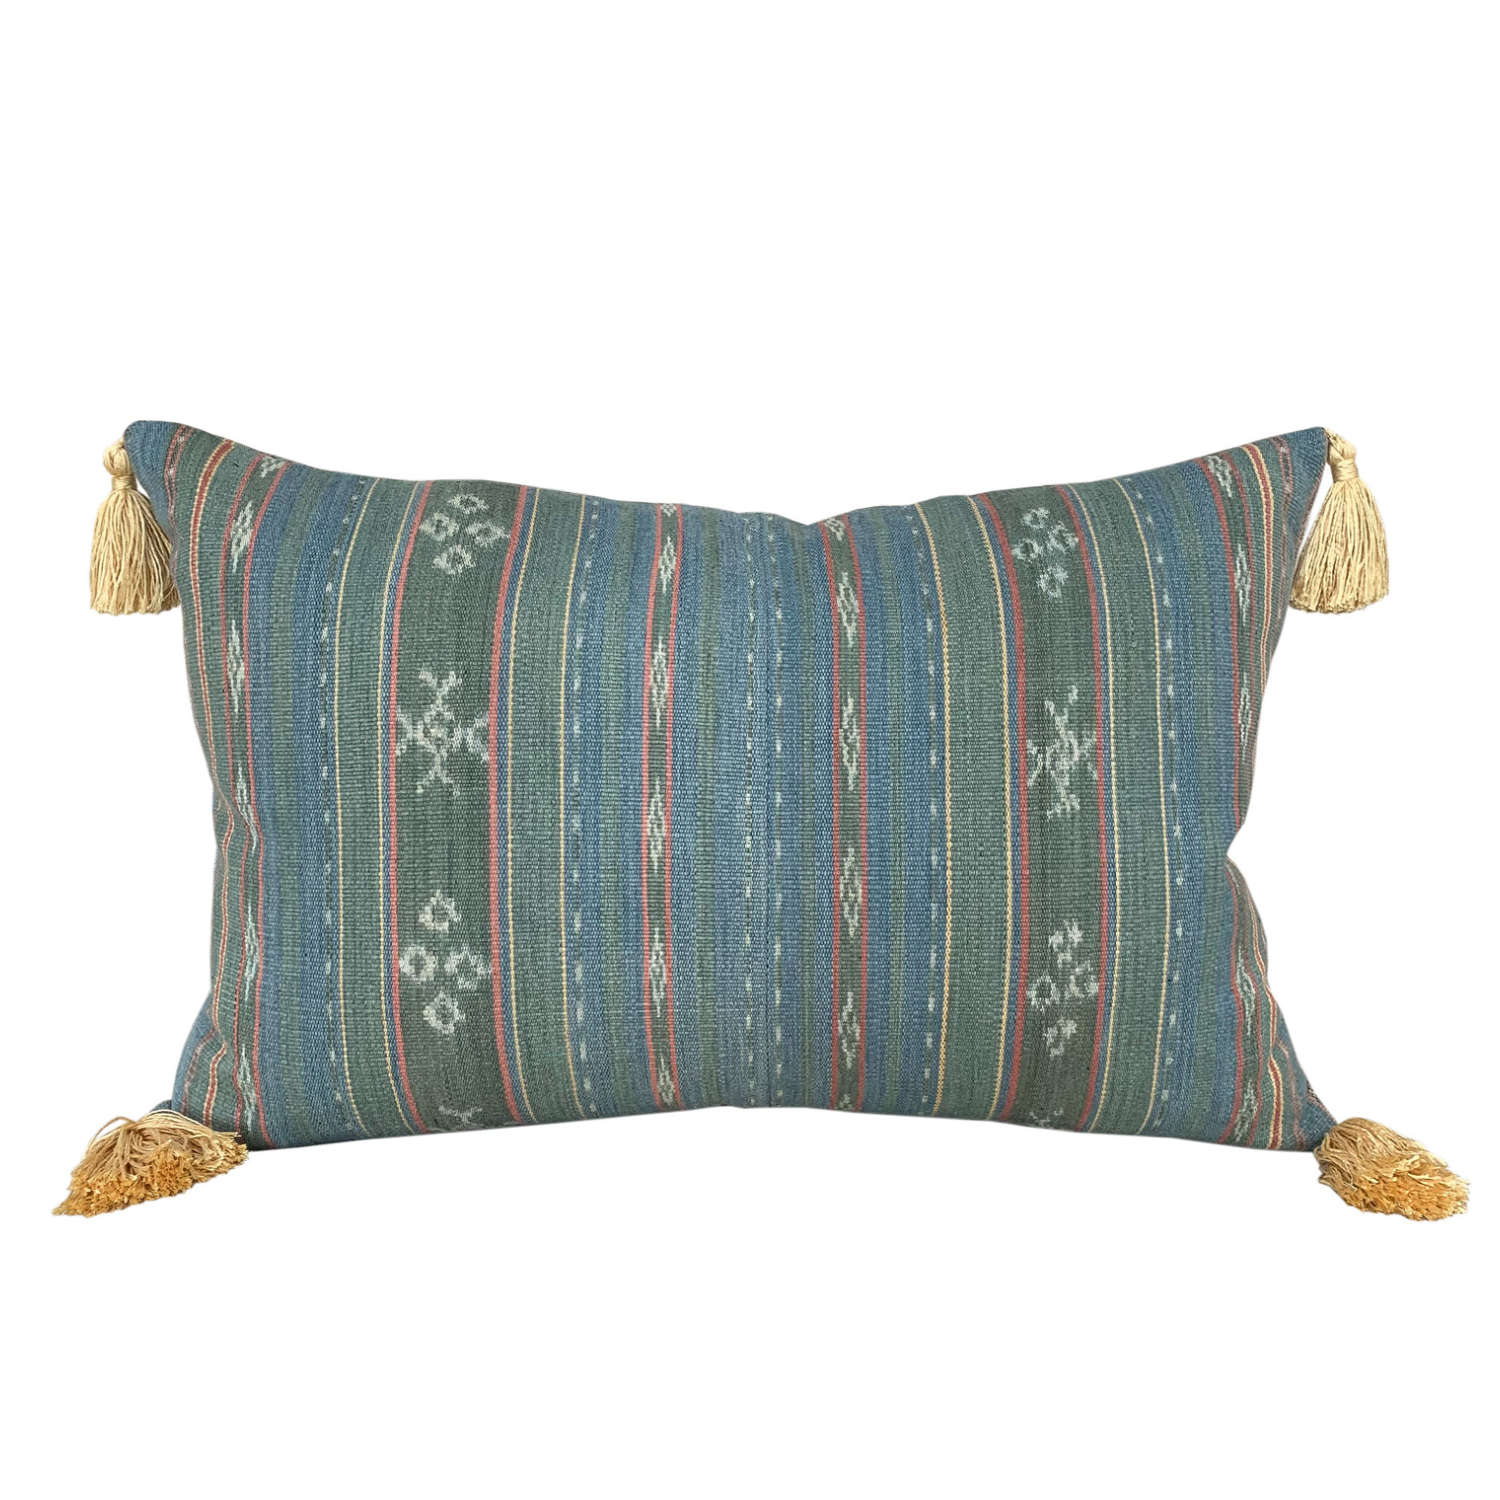 Flores ikat cushions with tassels